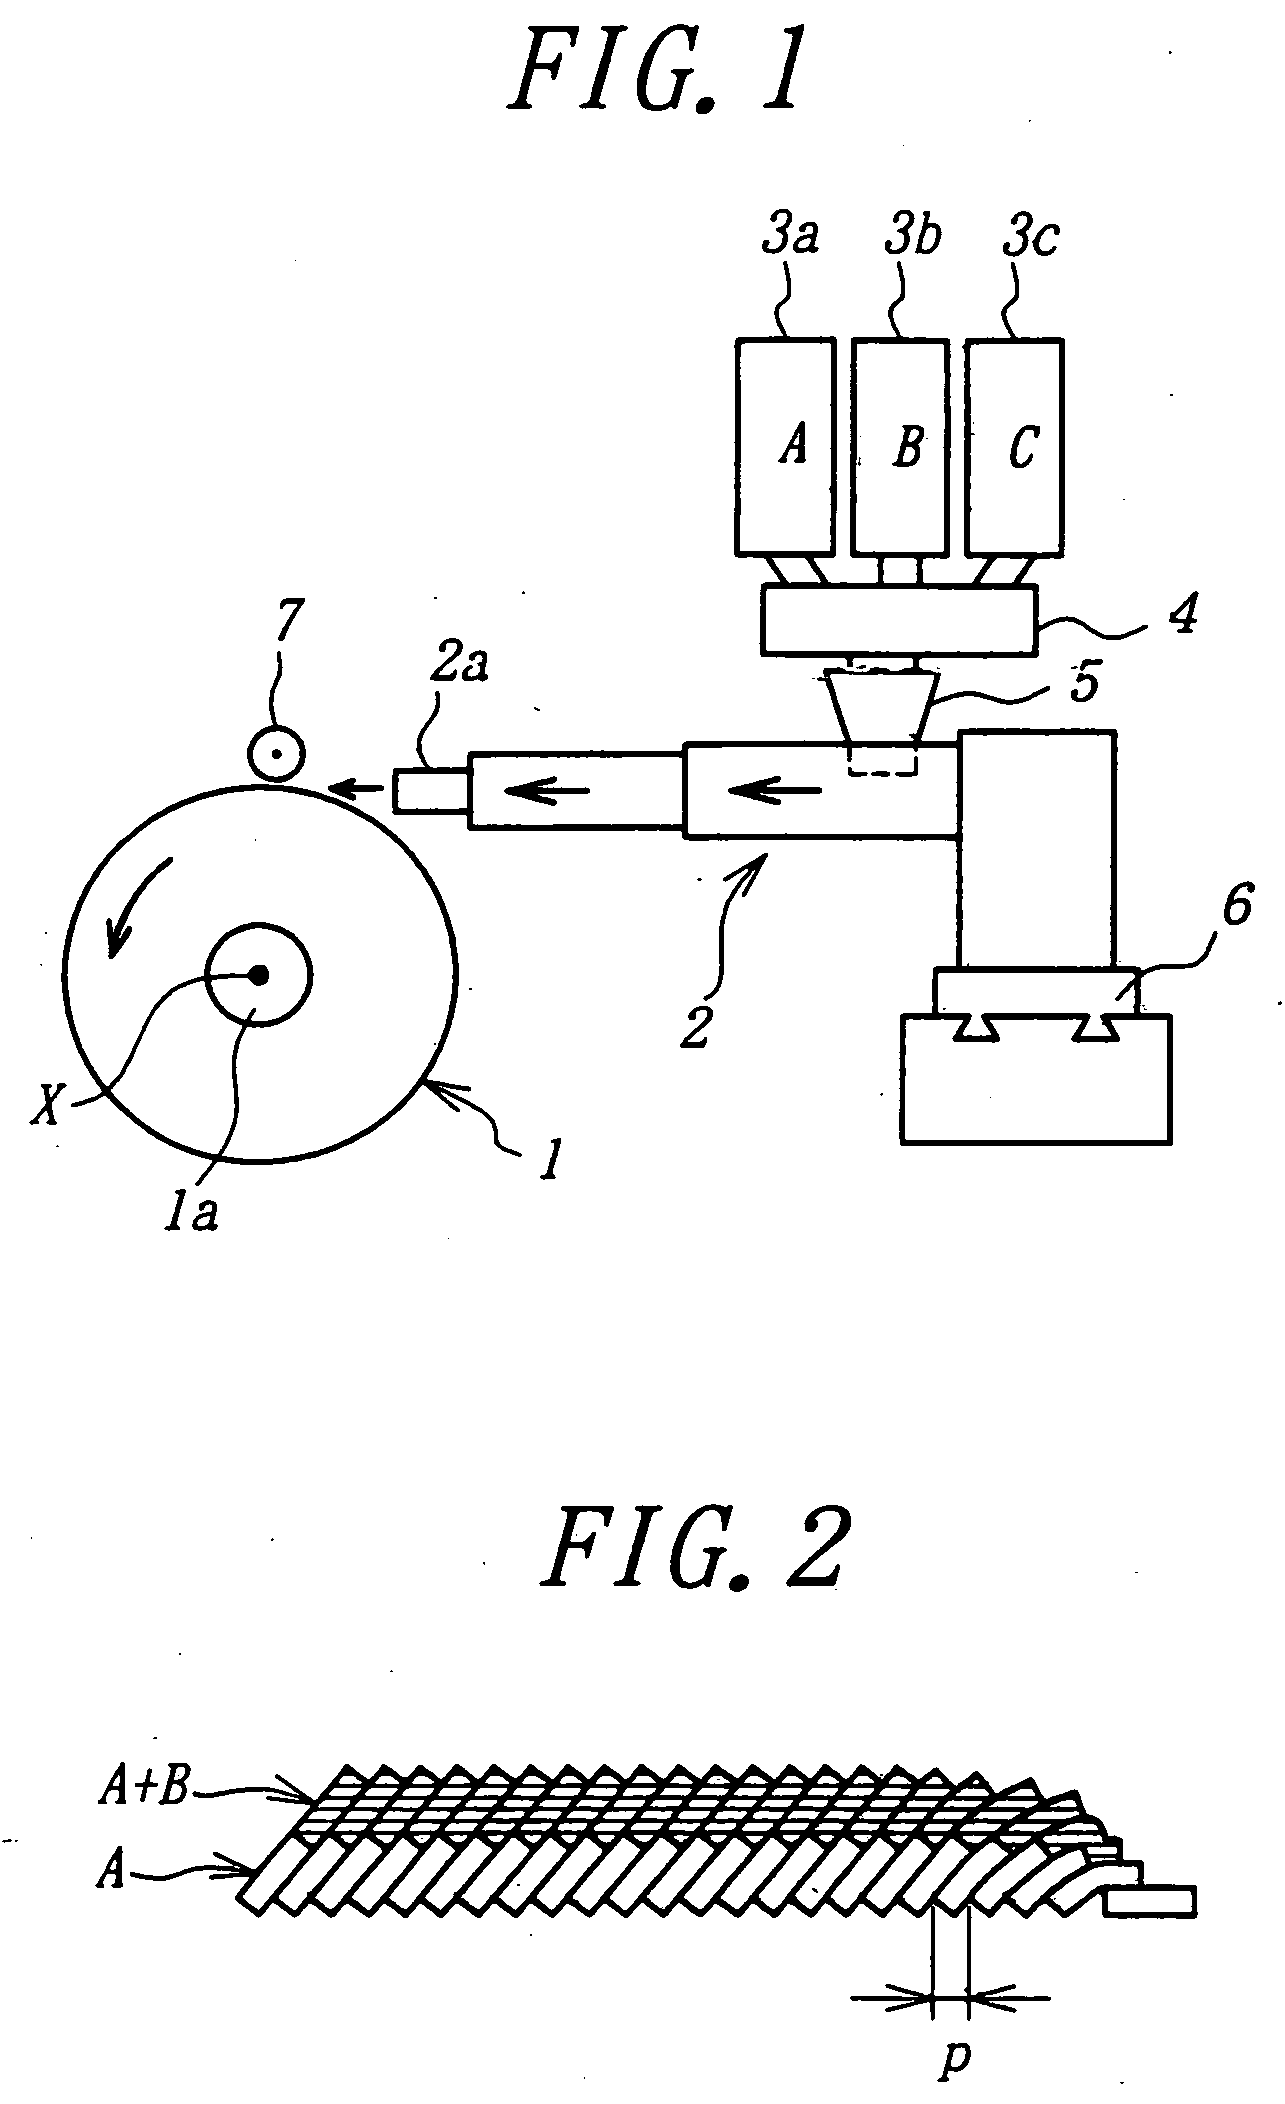 Method and apparatus for the lamination of band-shaped uncured rubber materials